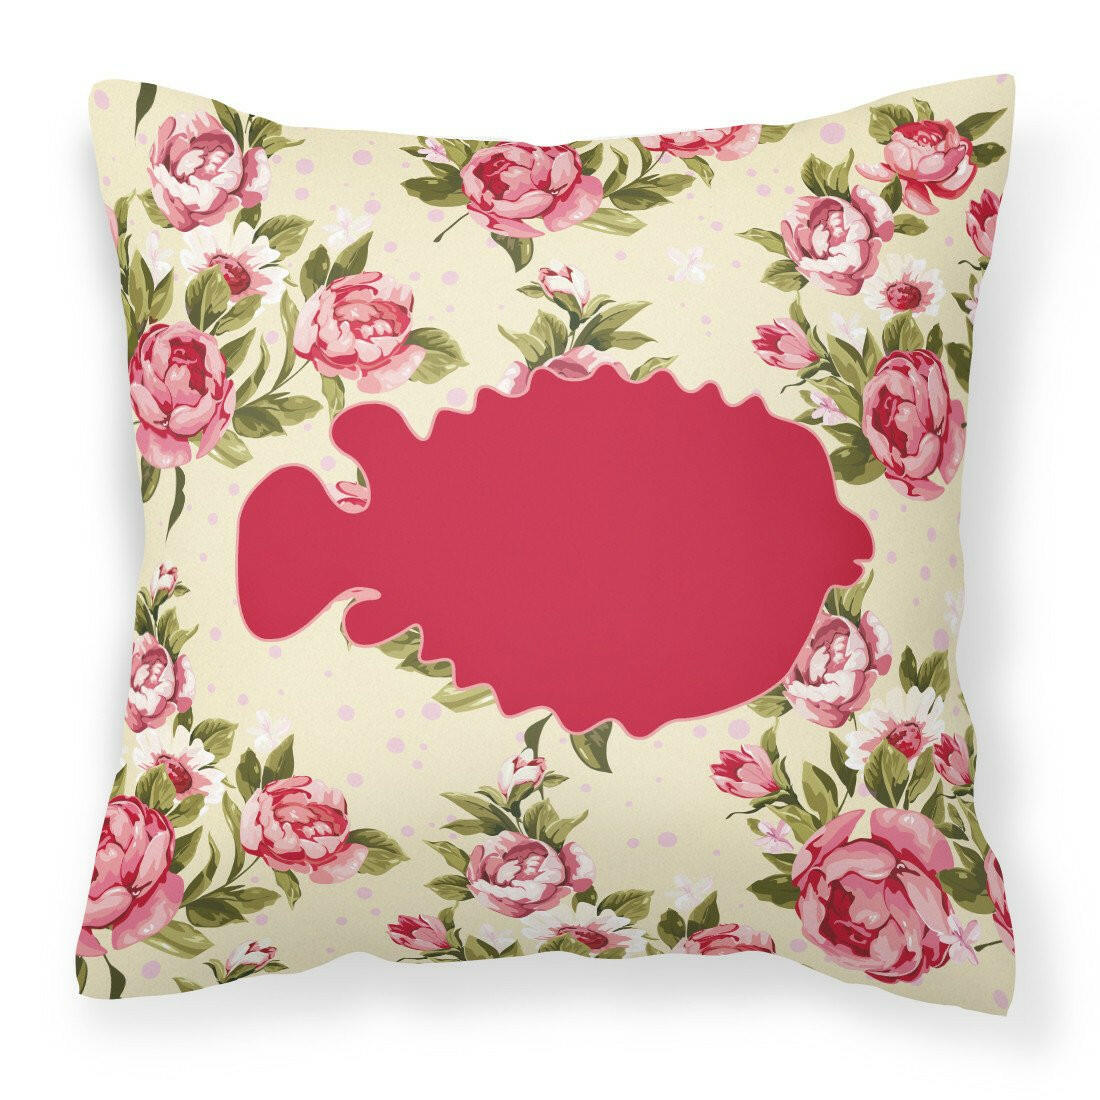 Fish - Blowfish Shabby Chic Yellow Roses  Fabric Decorative Pillow BB1016-RS-YW-PW1414 - the-store.com